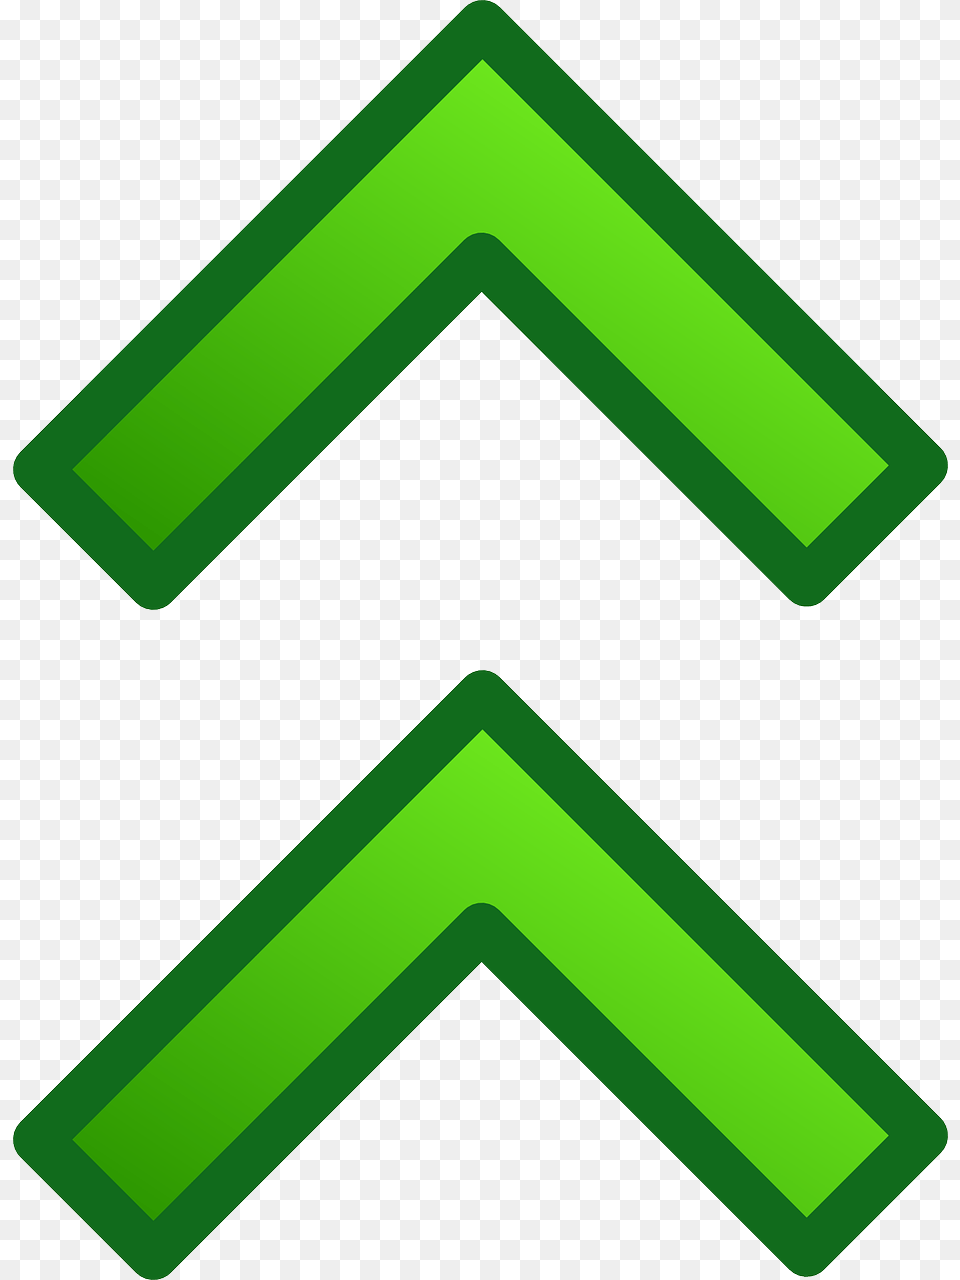 Arrow Green Glossy Up Upload North Arrow Up Gif, Symbol, Recycling Symbol Png Image